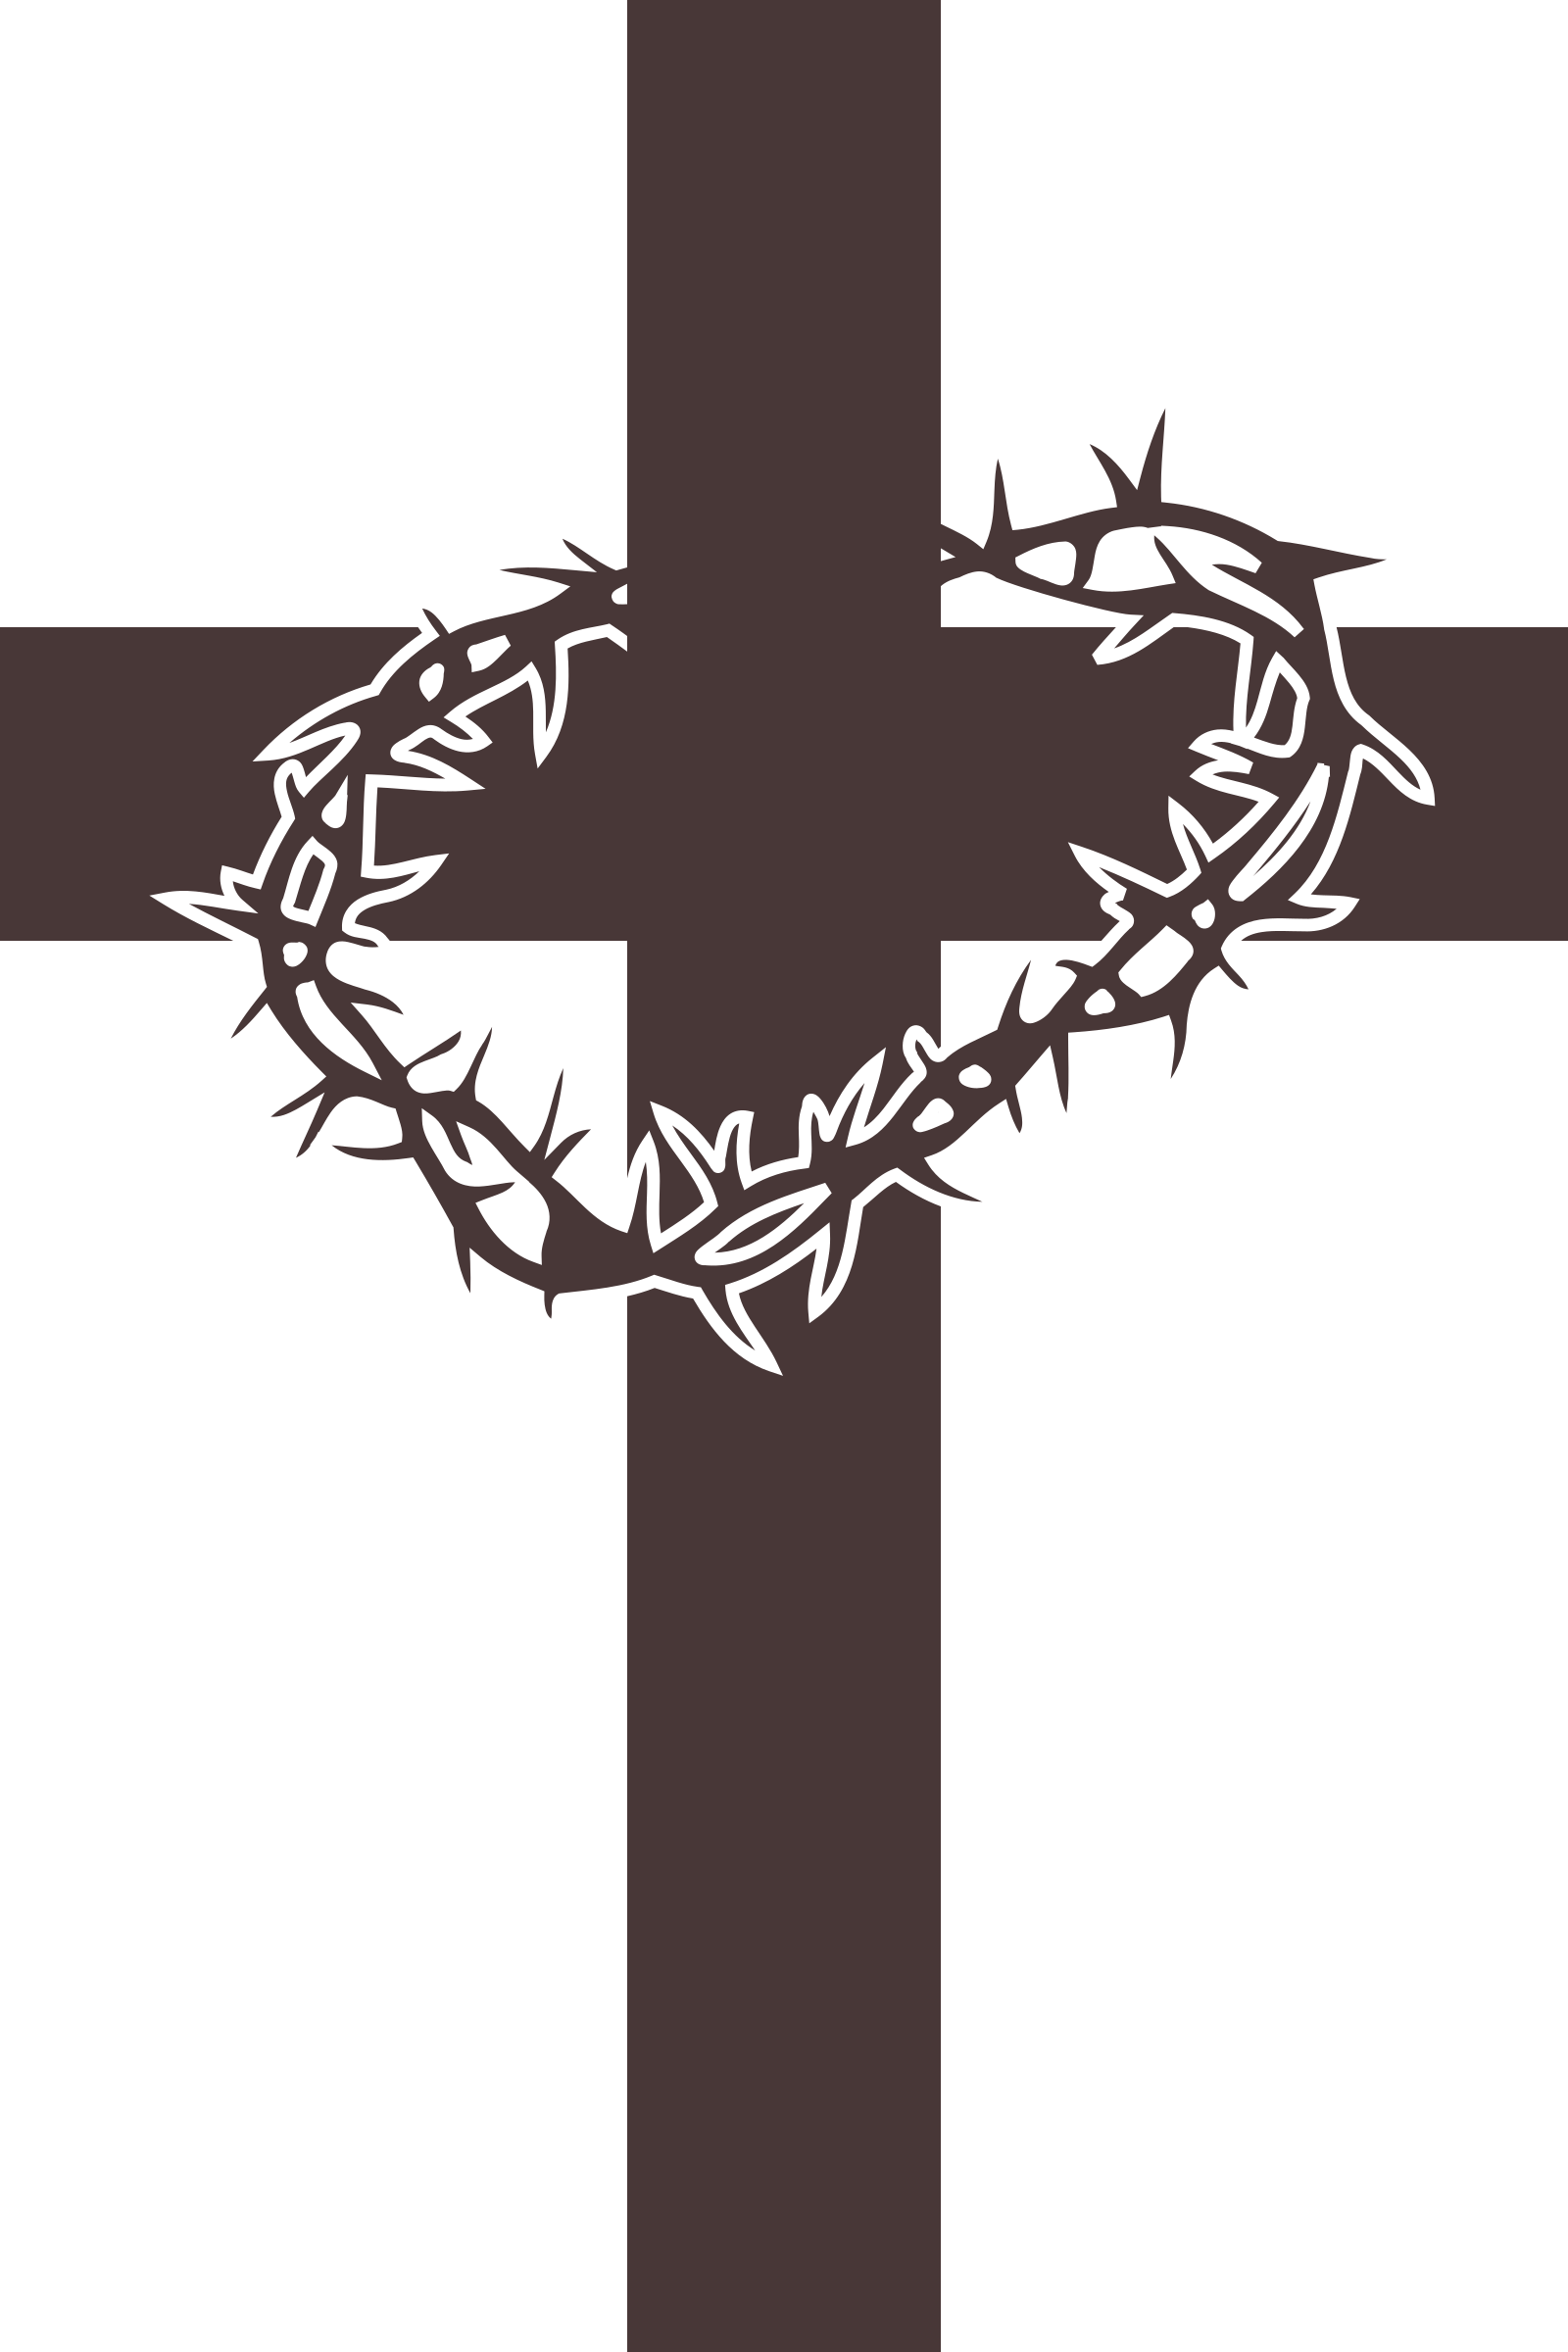 Download Cross and Thorns vector clipart image - Free stock photo ...